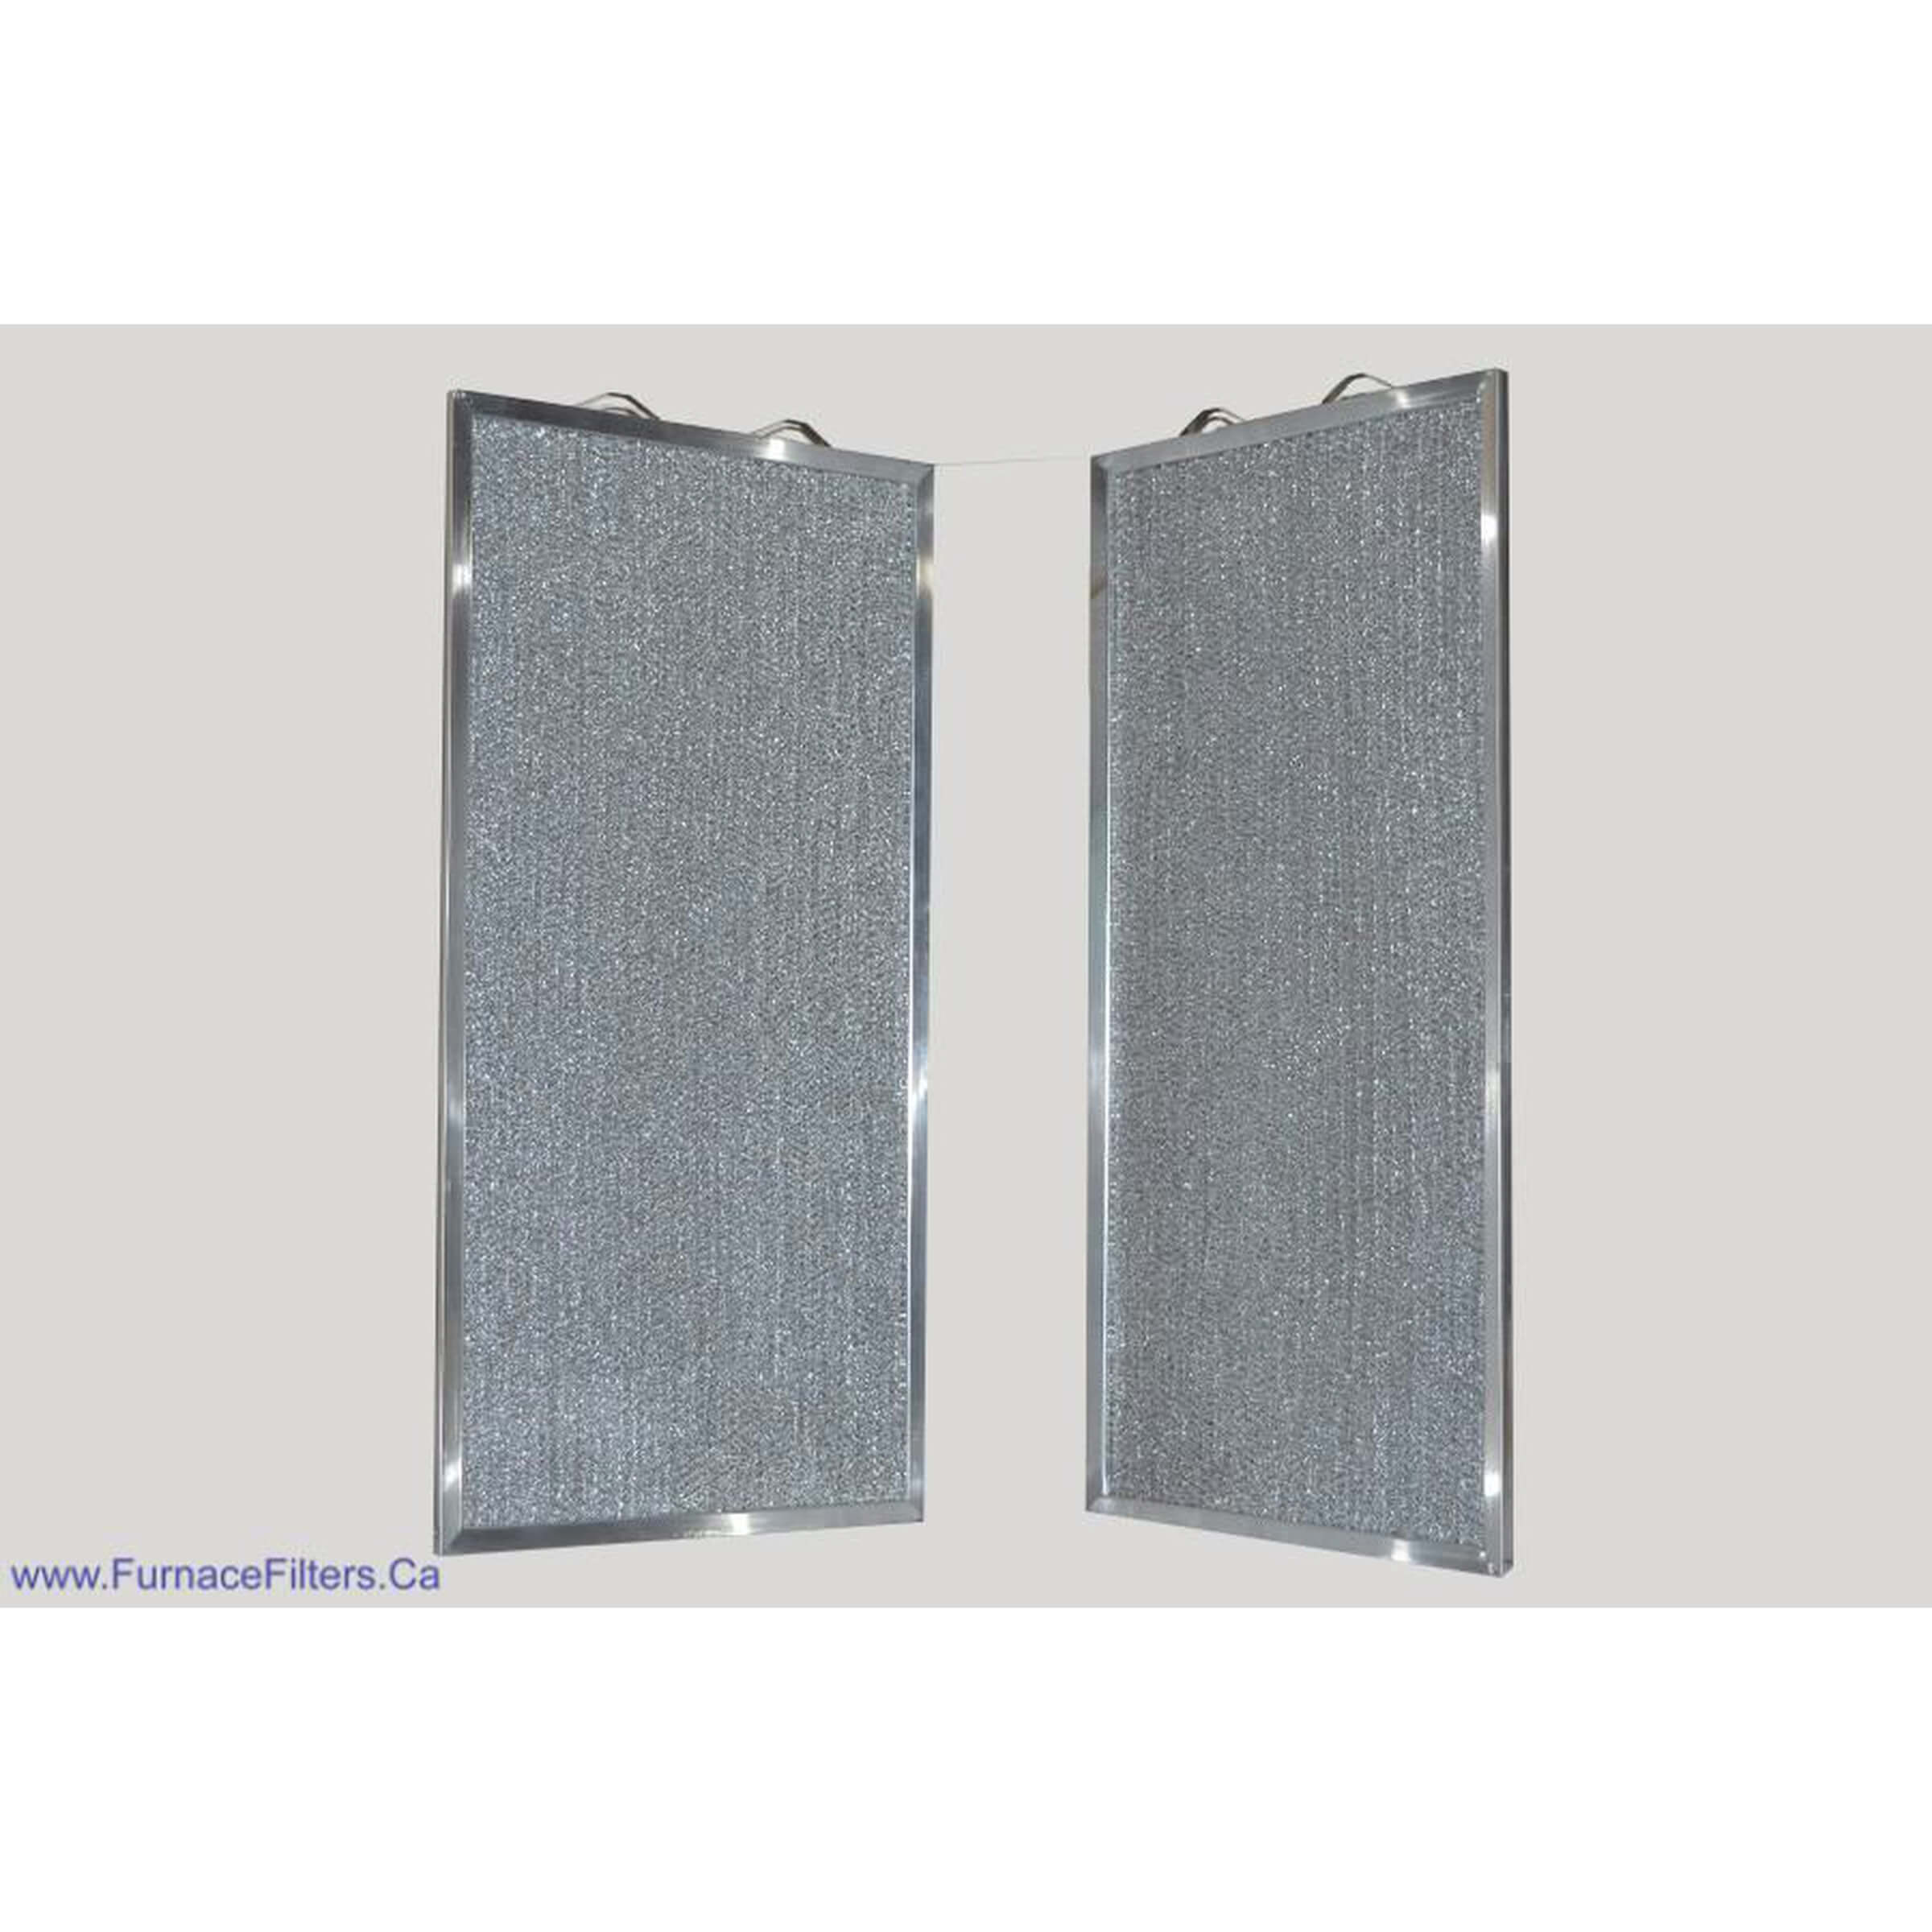 Honeywell Mesh Pre-Filter for 20x20 Electronic Air Cleaners. Systyem Requires 2 Pcs. Package of 2